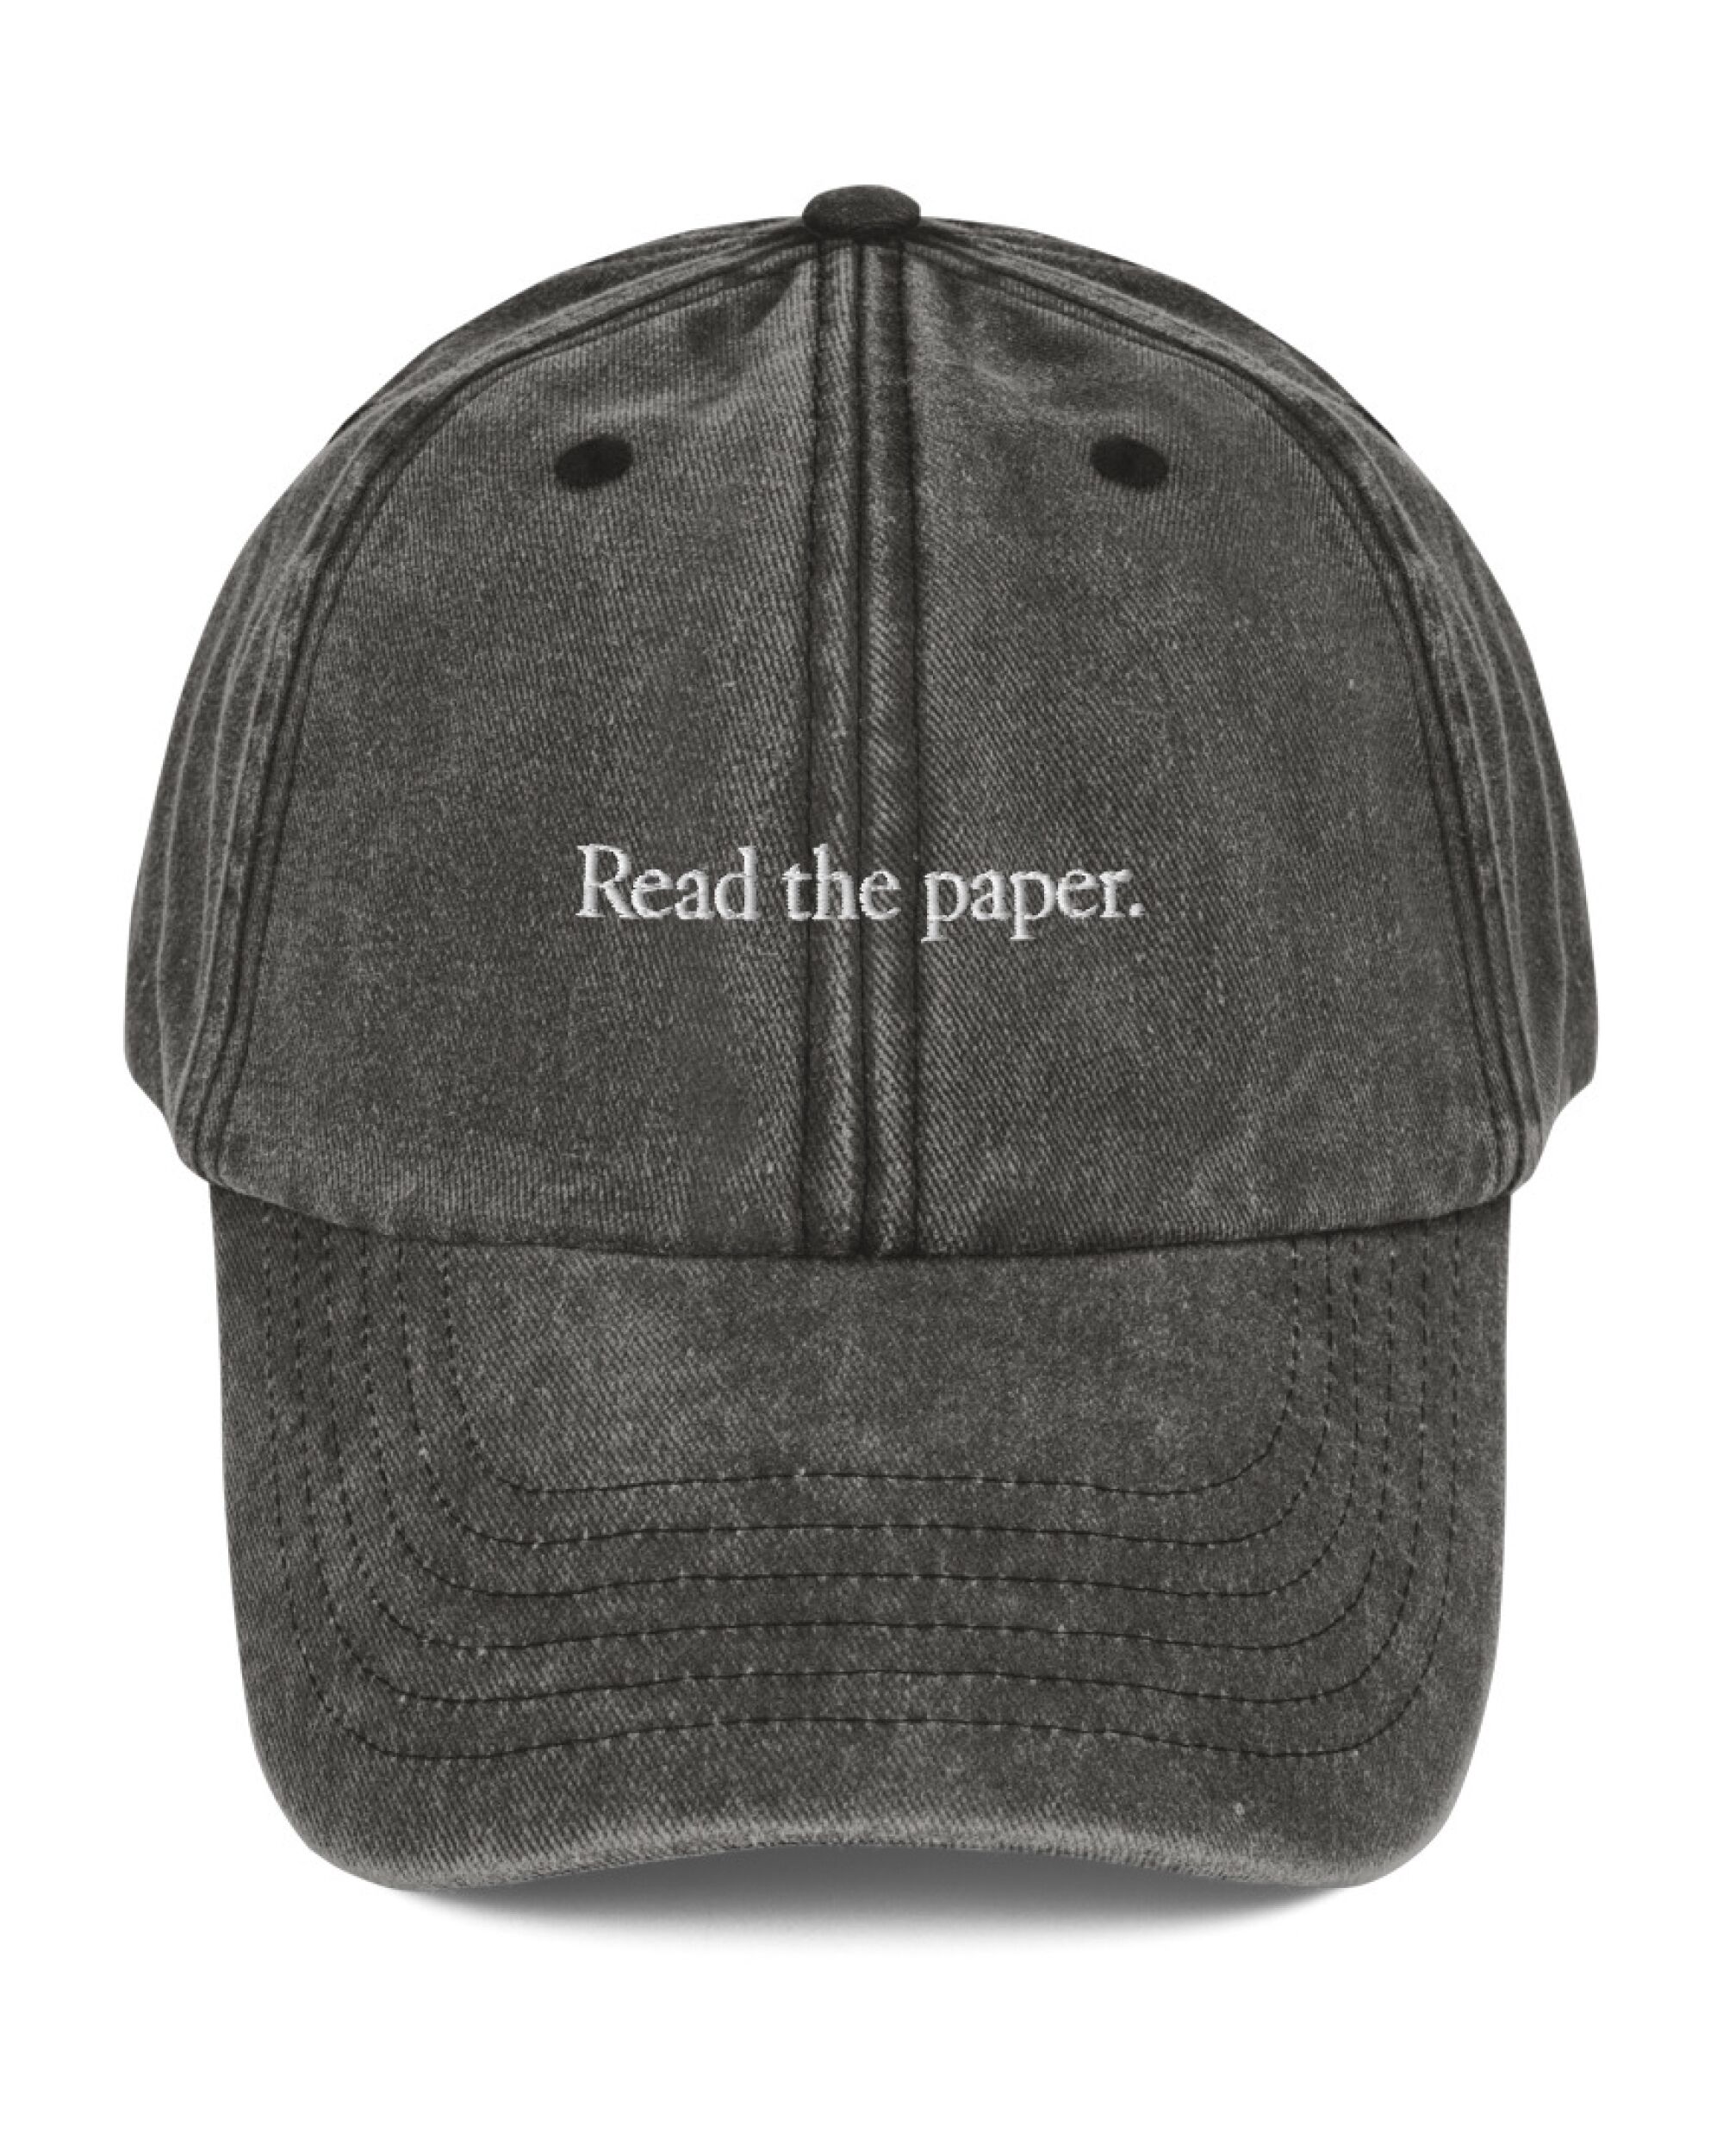 Read the paper ball cap from the LA Times